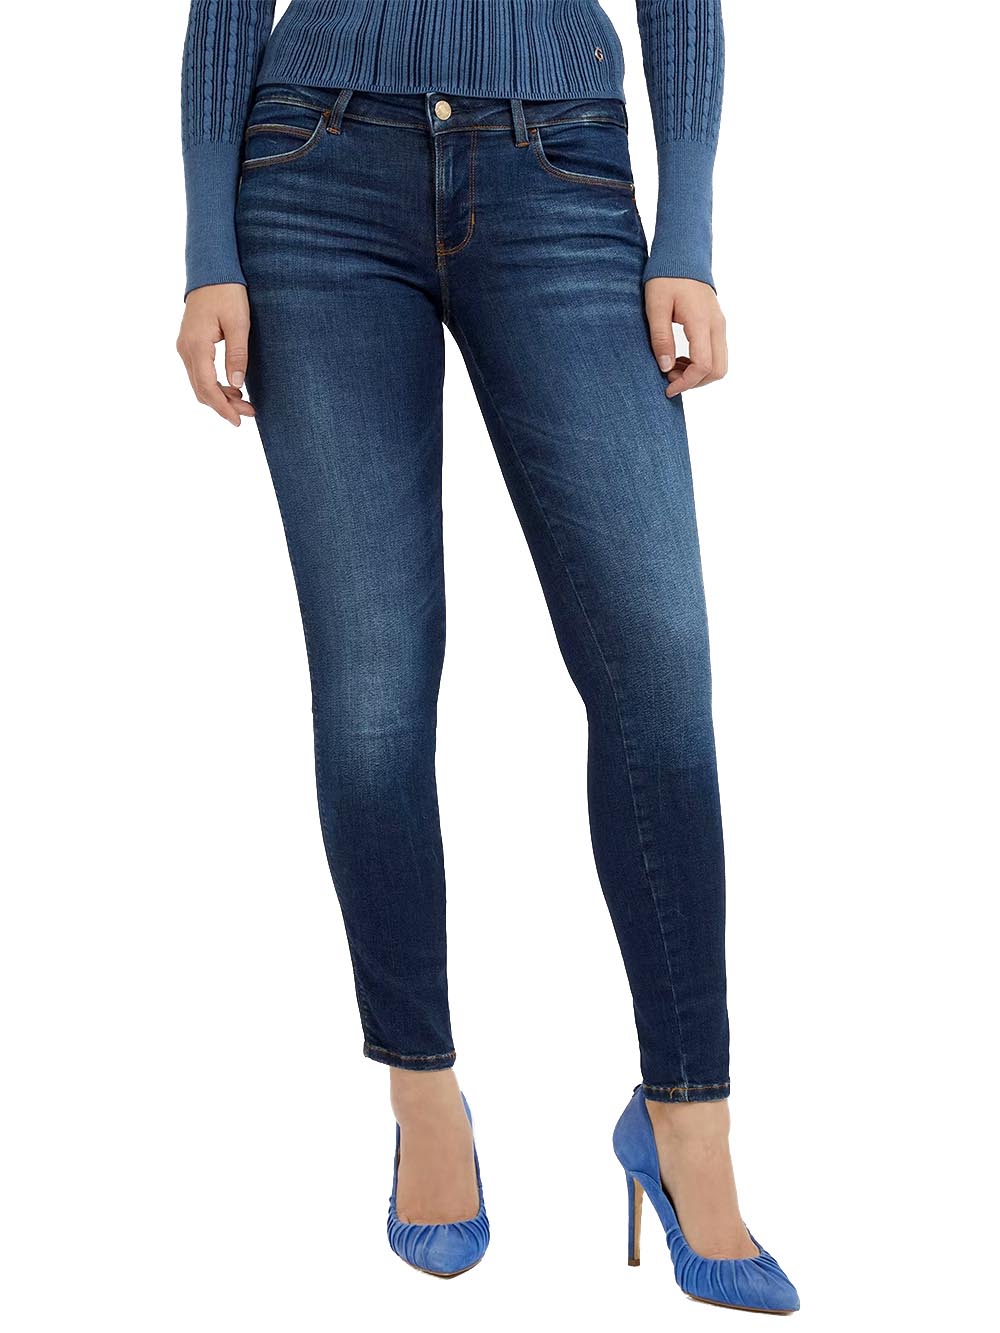 Guess Jeans Donna Scuro